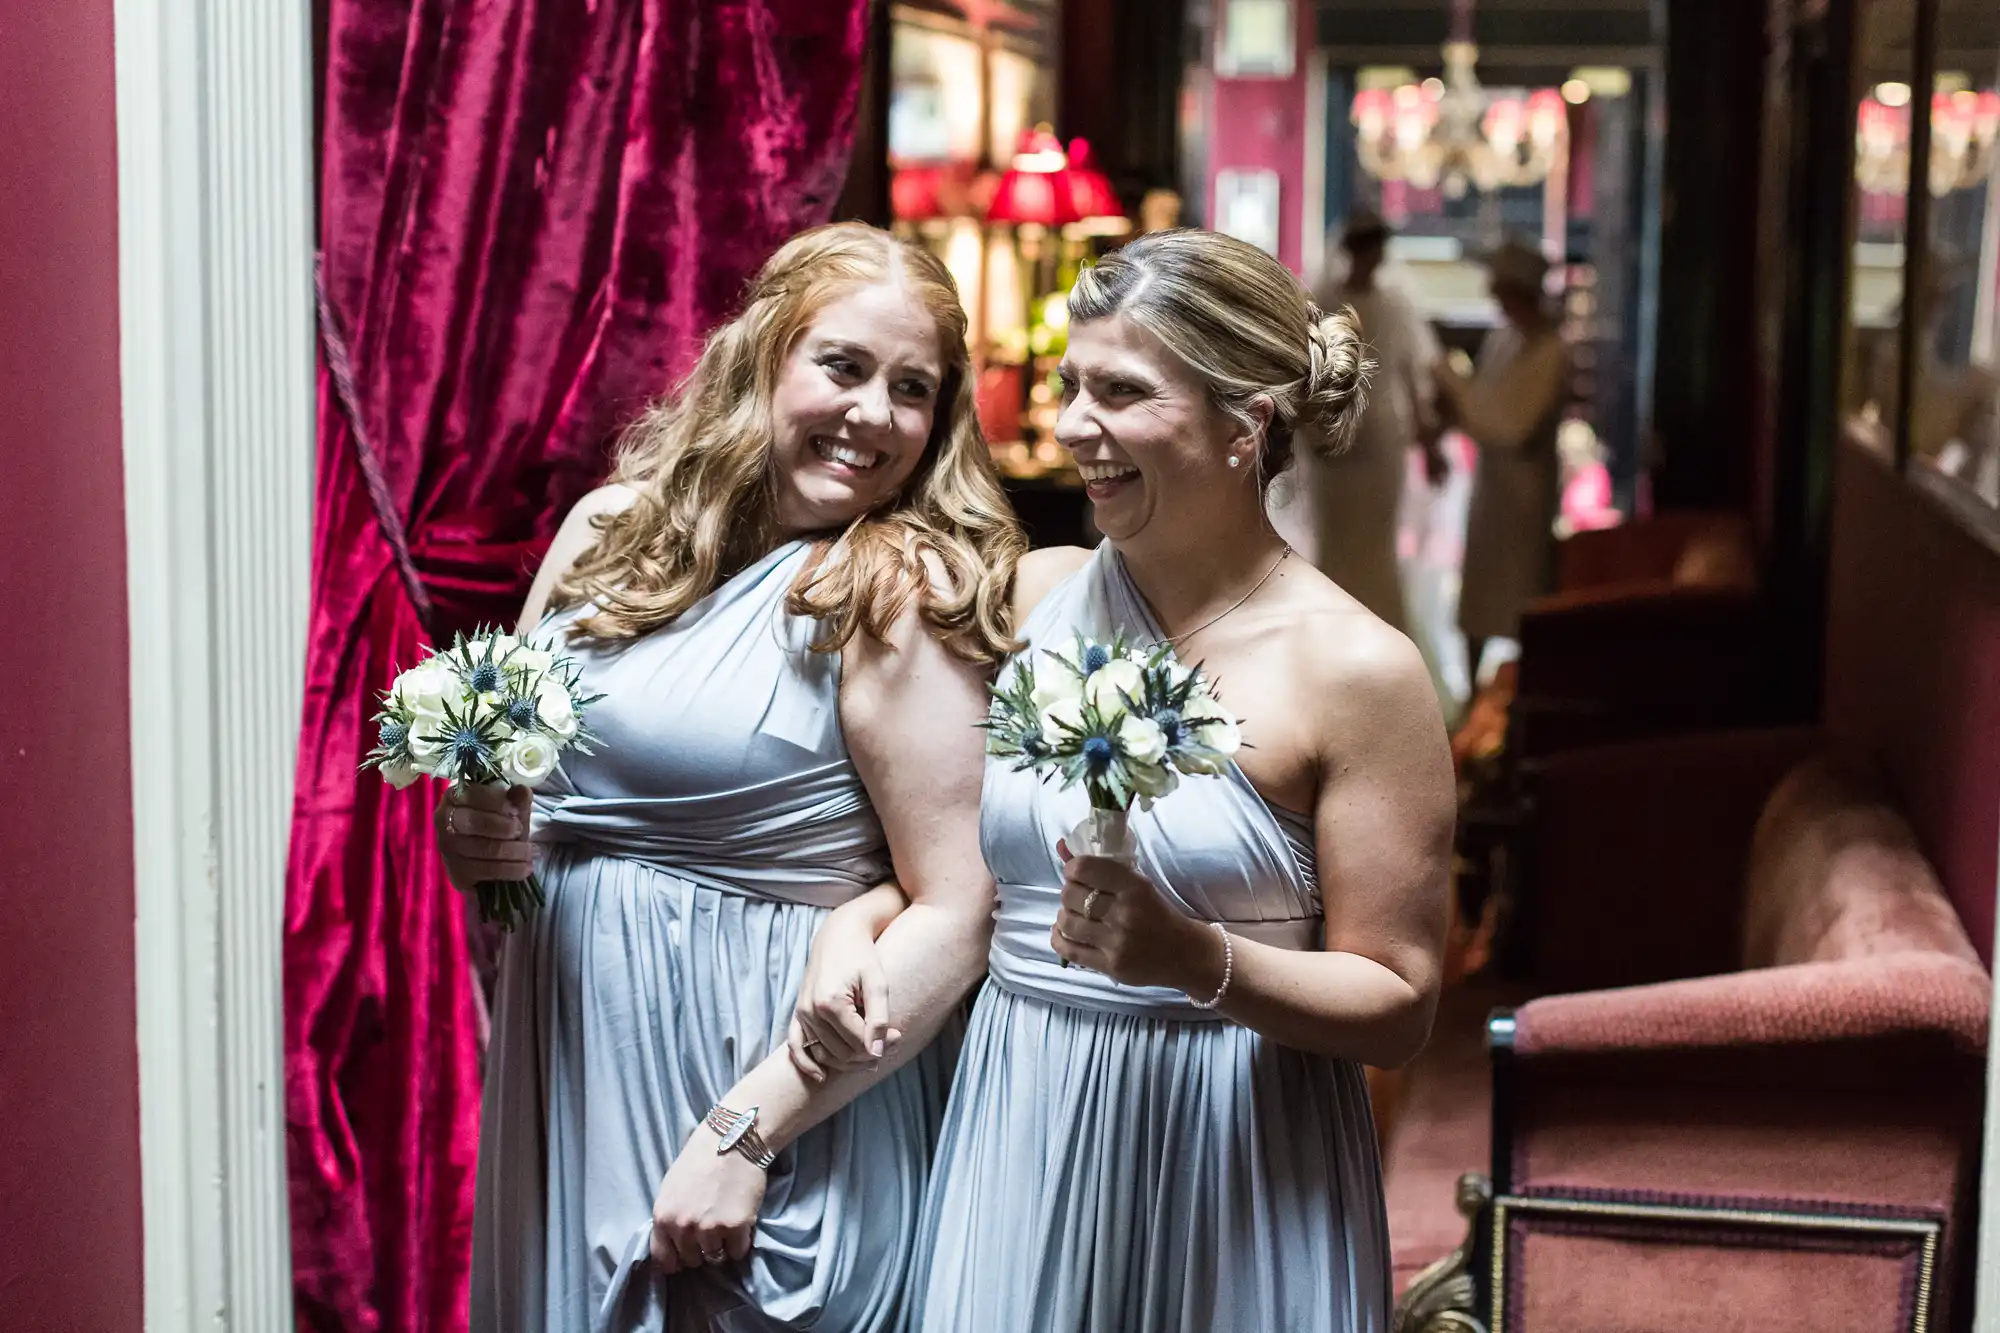 Two bridesmaids in lavender dresses hold bouquets and smile while walking arm-in-arm down a dimly lit corridor with red curtains and chairs.